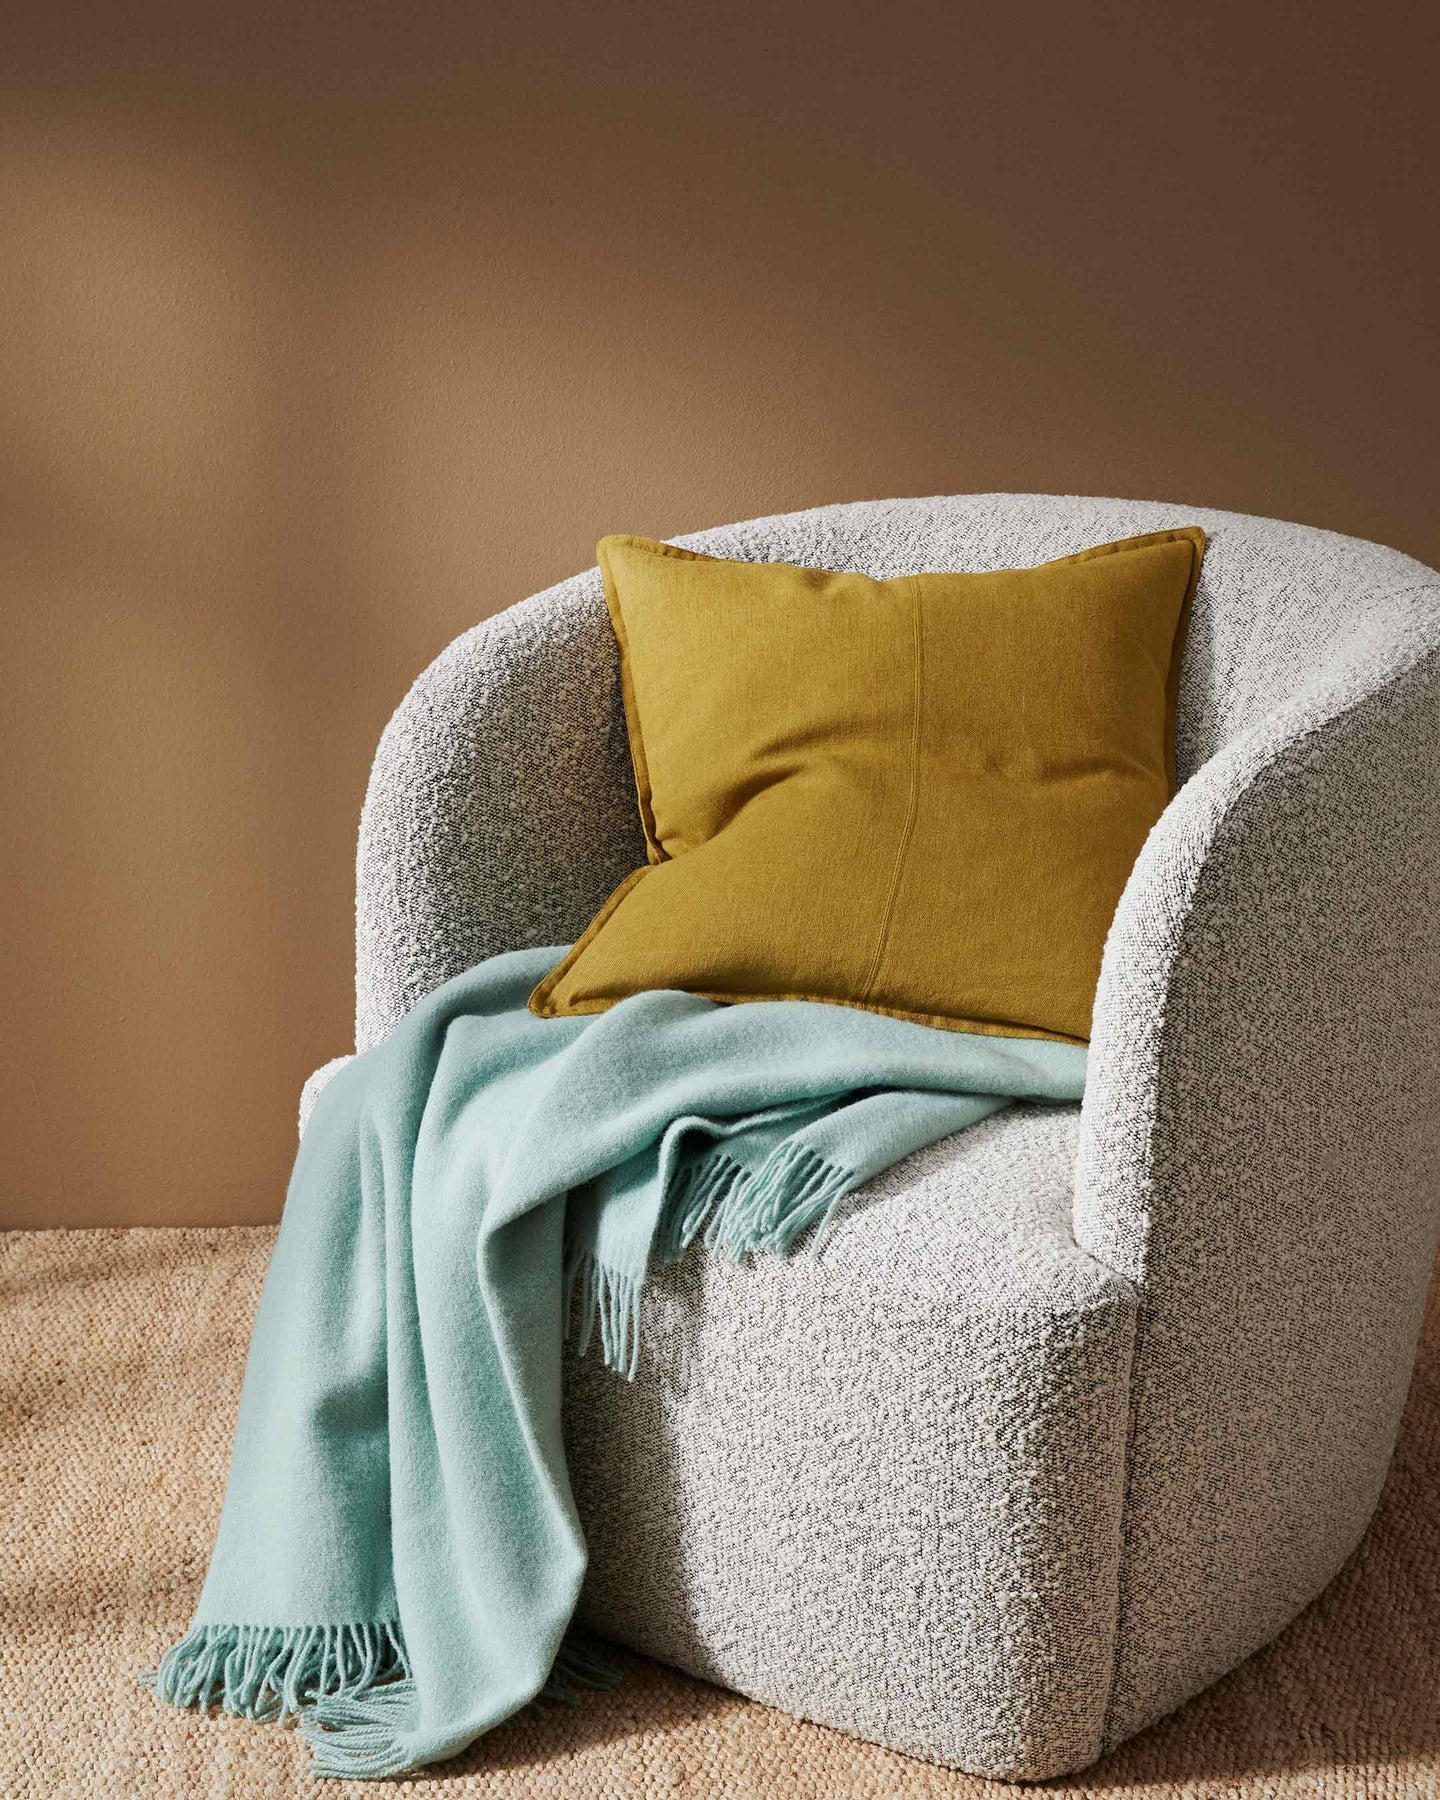 Made from 100% New Zealand lambswool, Nevis throw blankets in Mineral are simply luxurious. All of our throws make the perfect companion over cooler days and nights, and can also be enjoyed outdoors